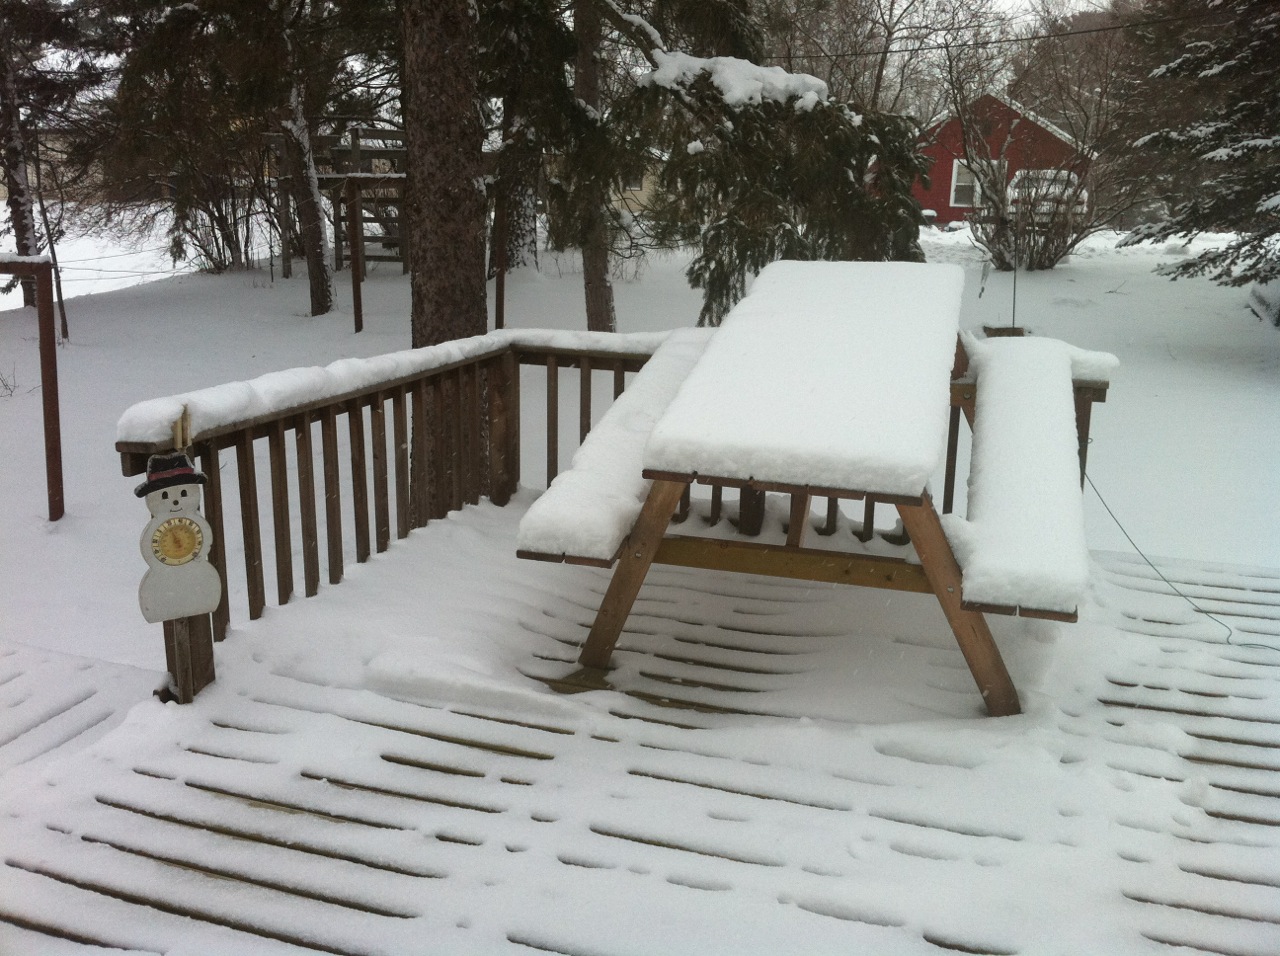 More snow … looks like another inch or two